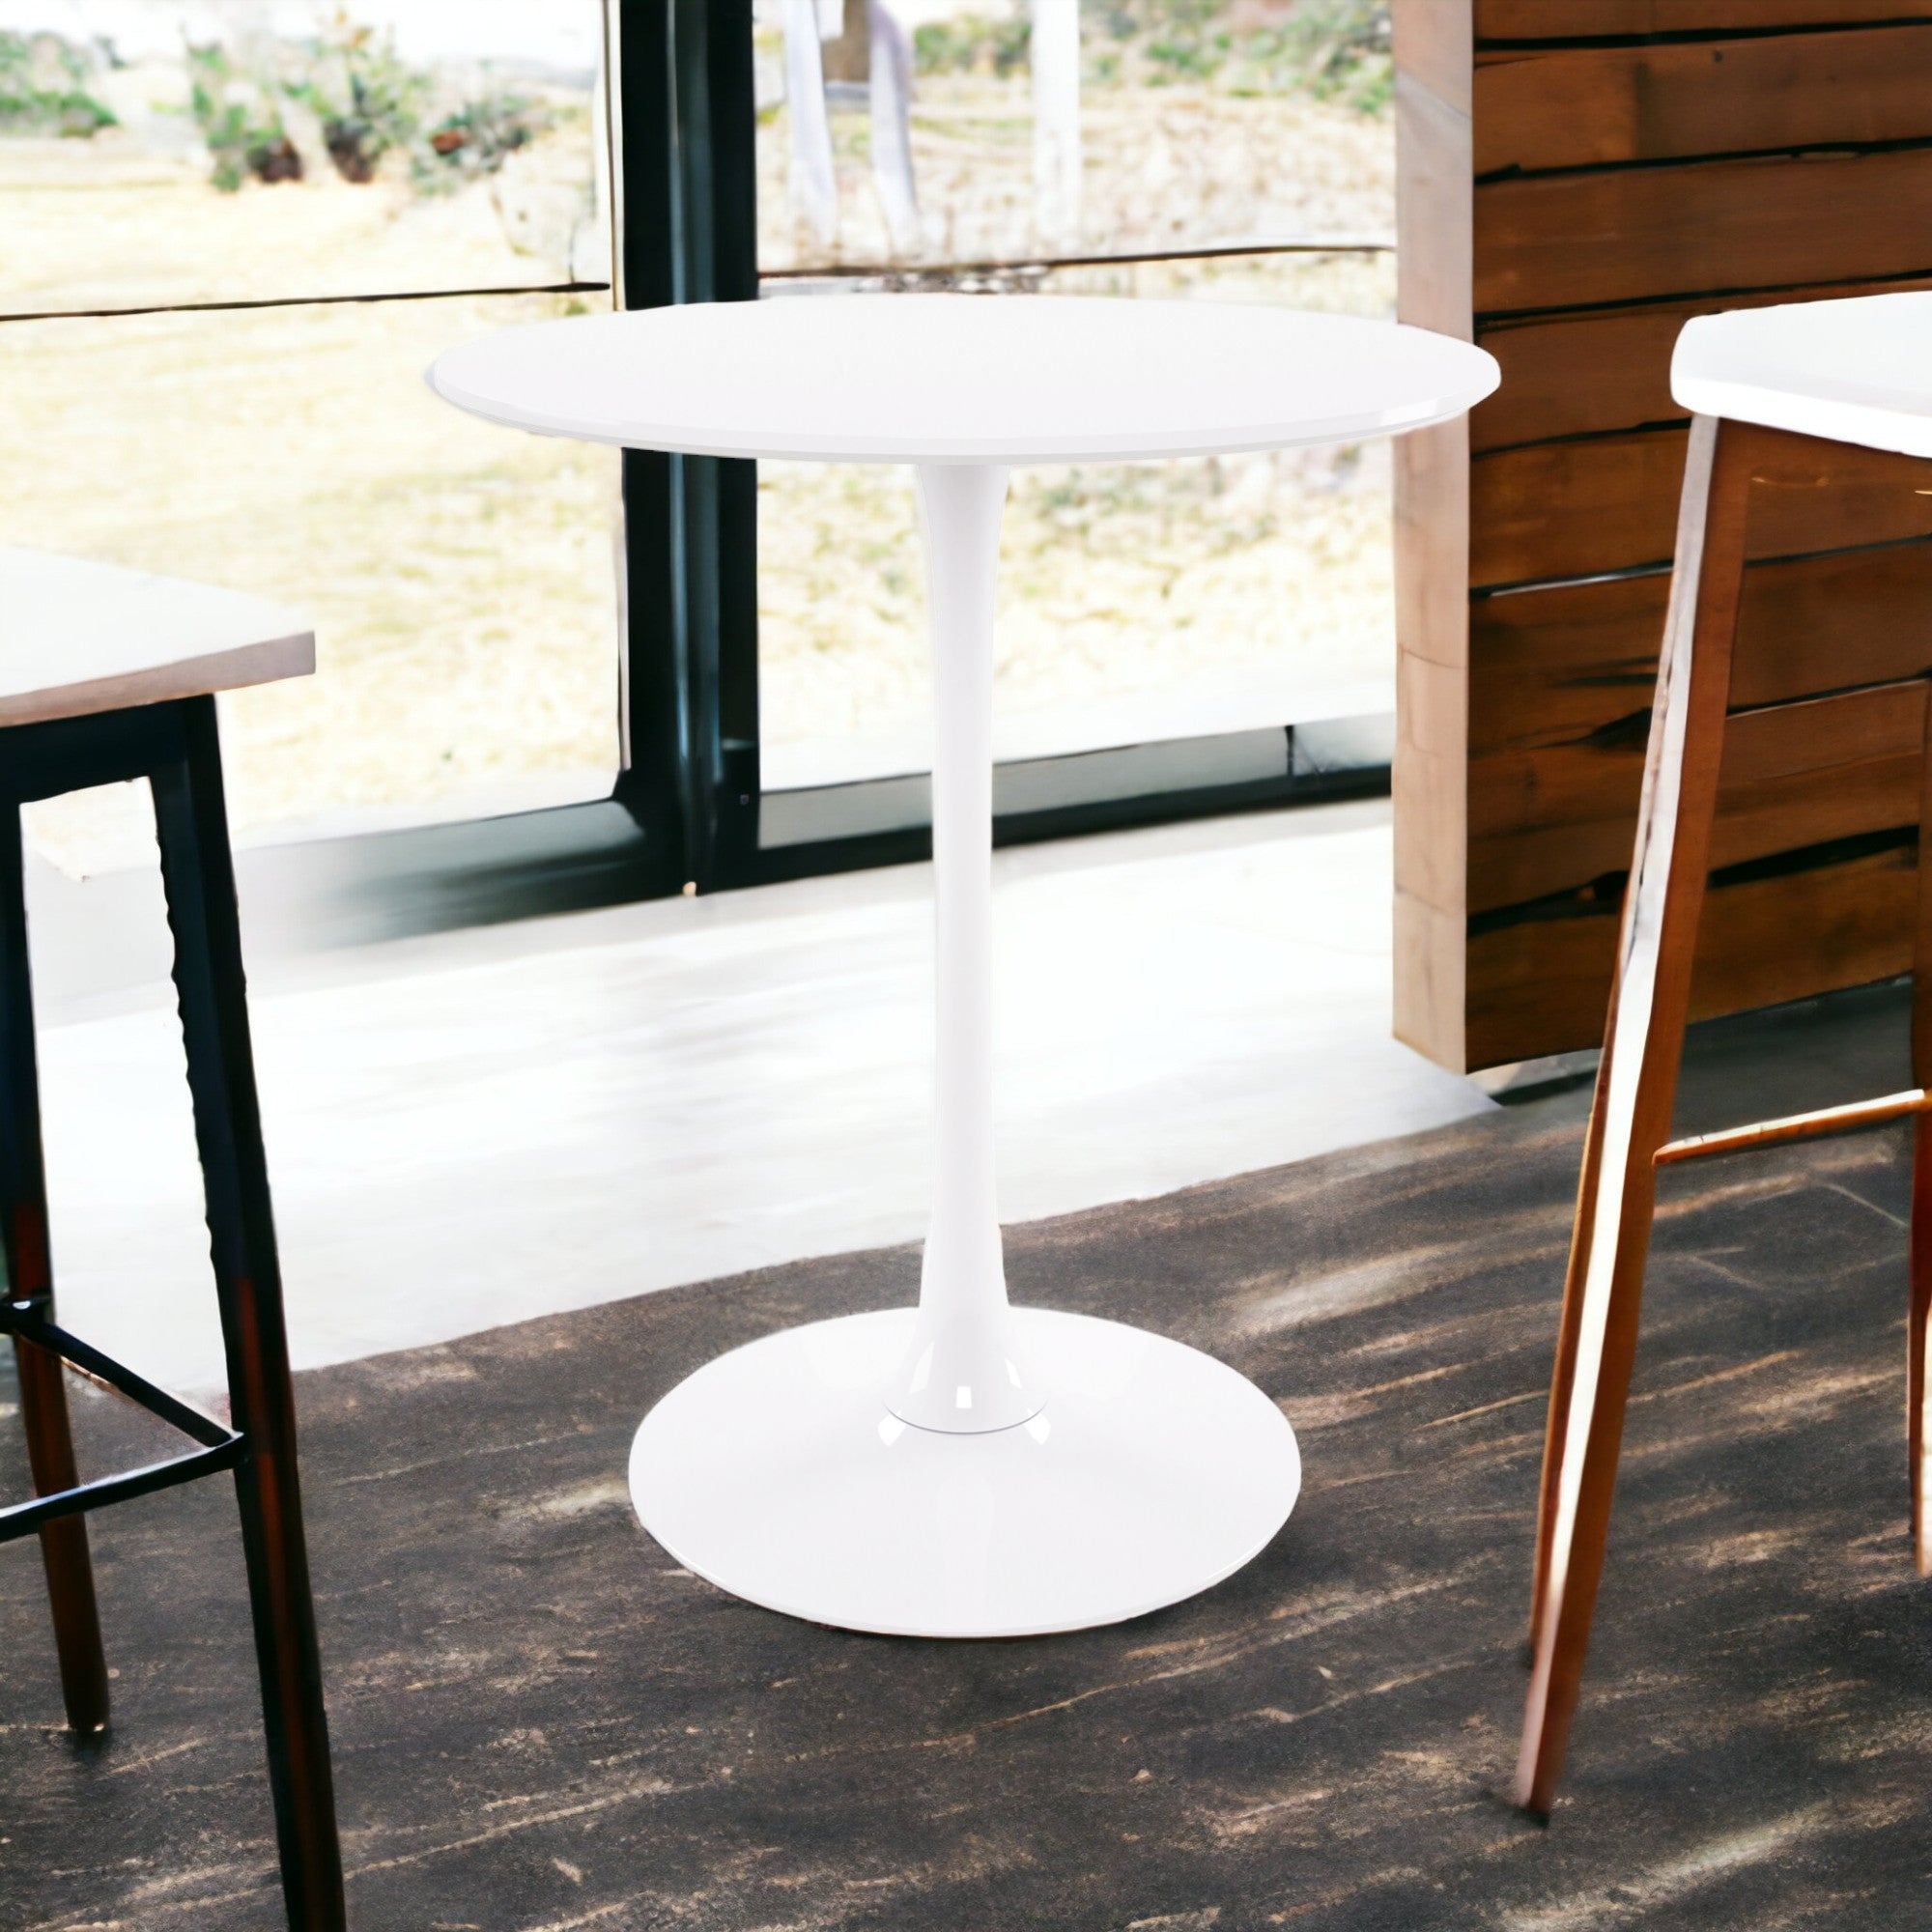 36" White Rounded Manufactured Wood and Metal Bar Table